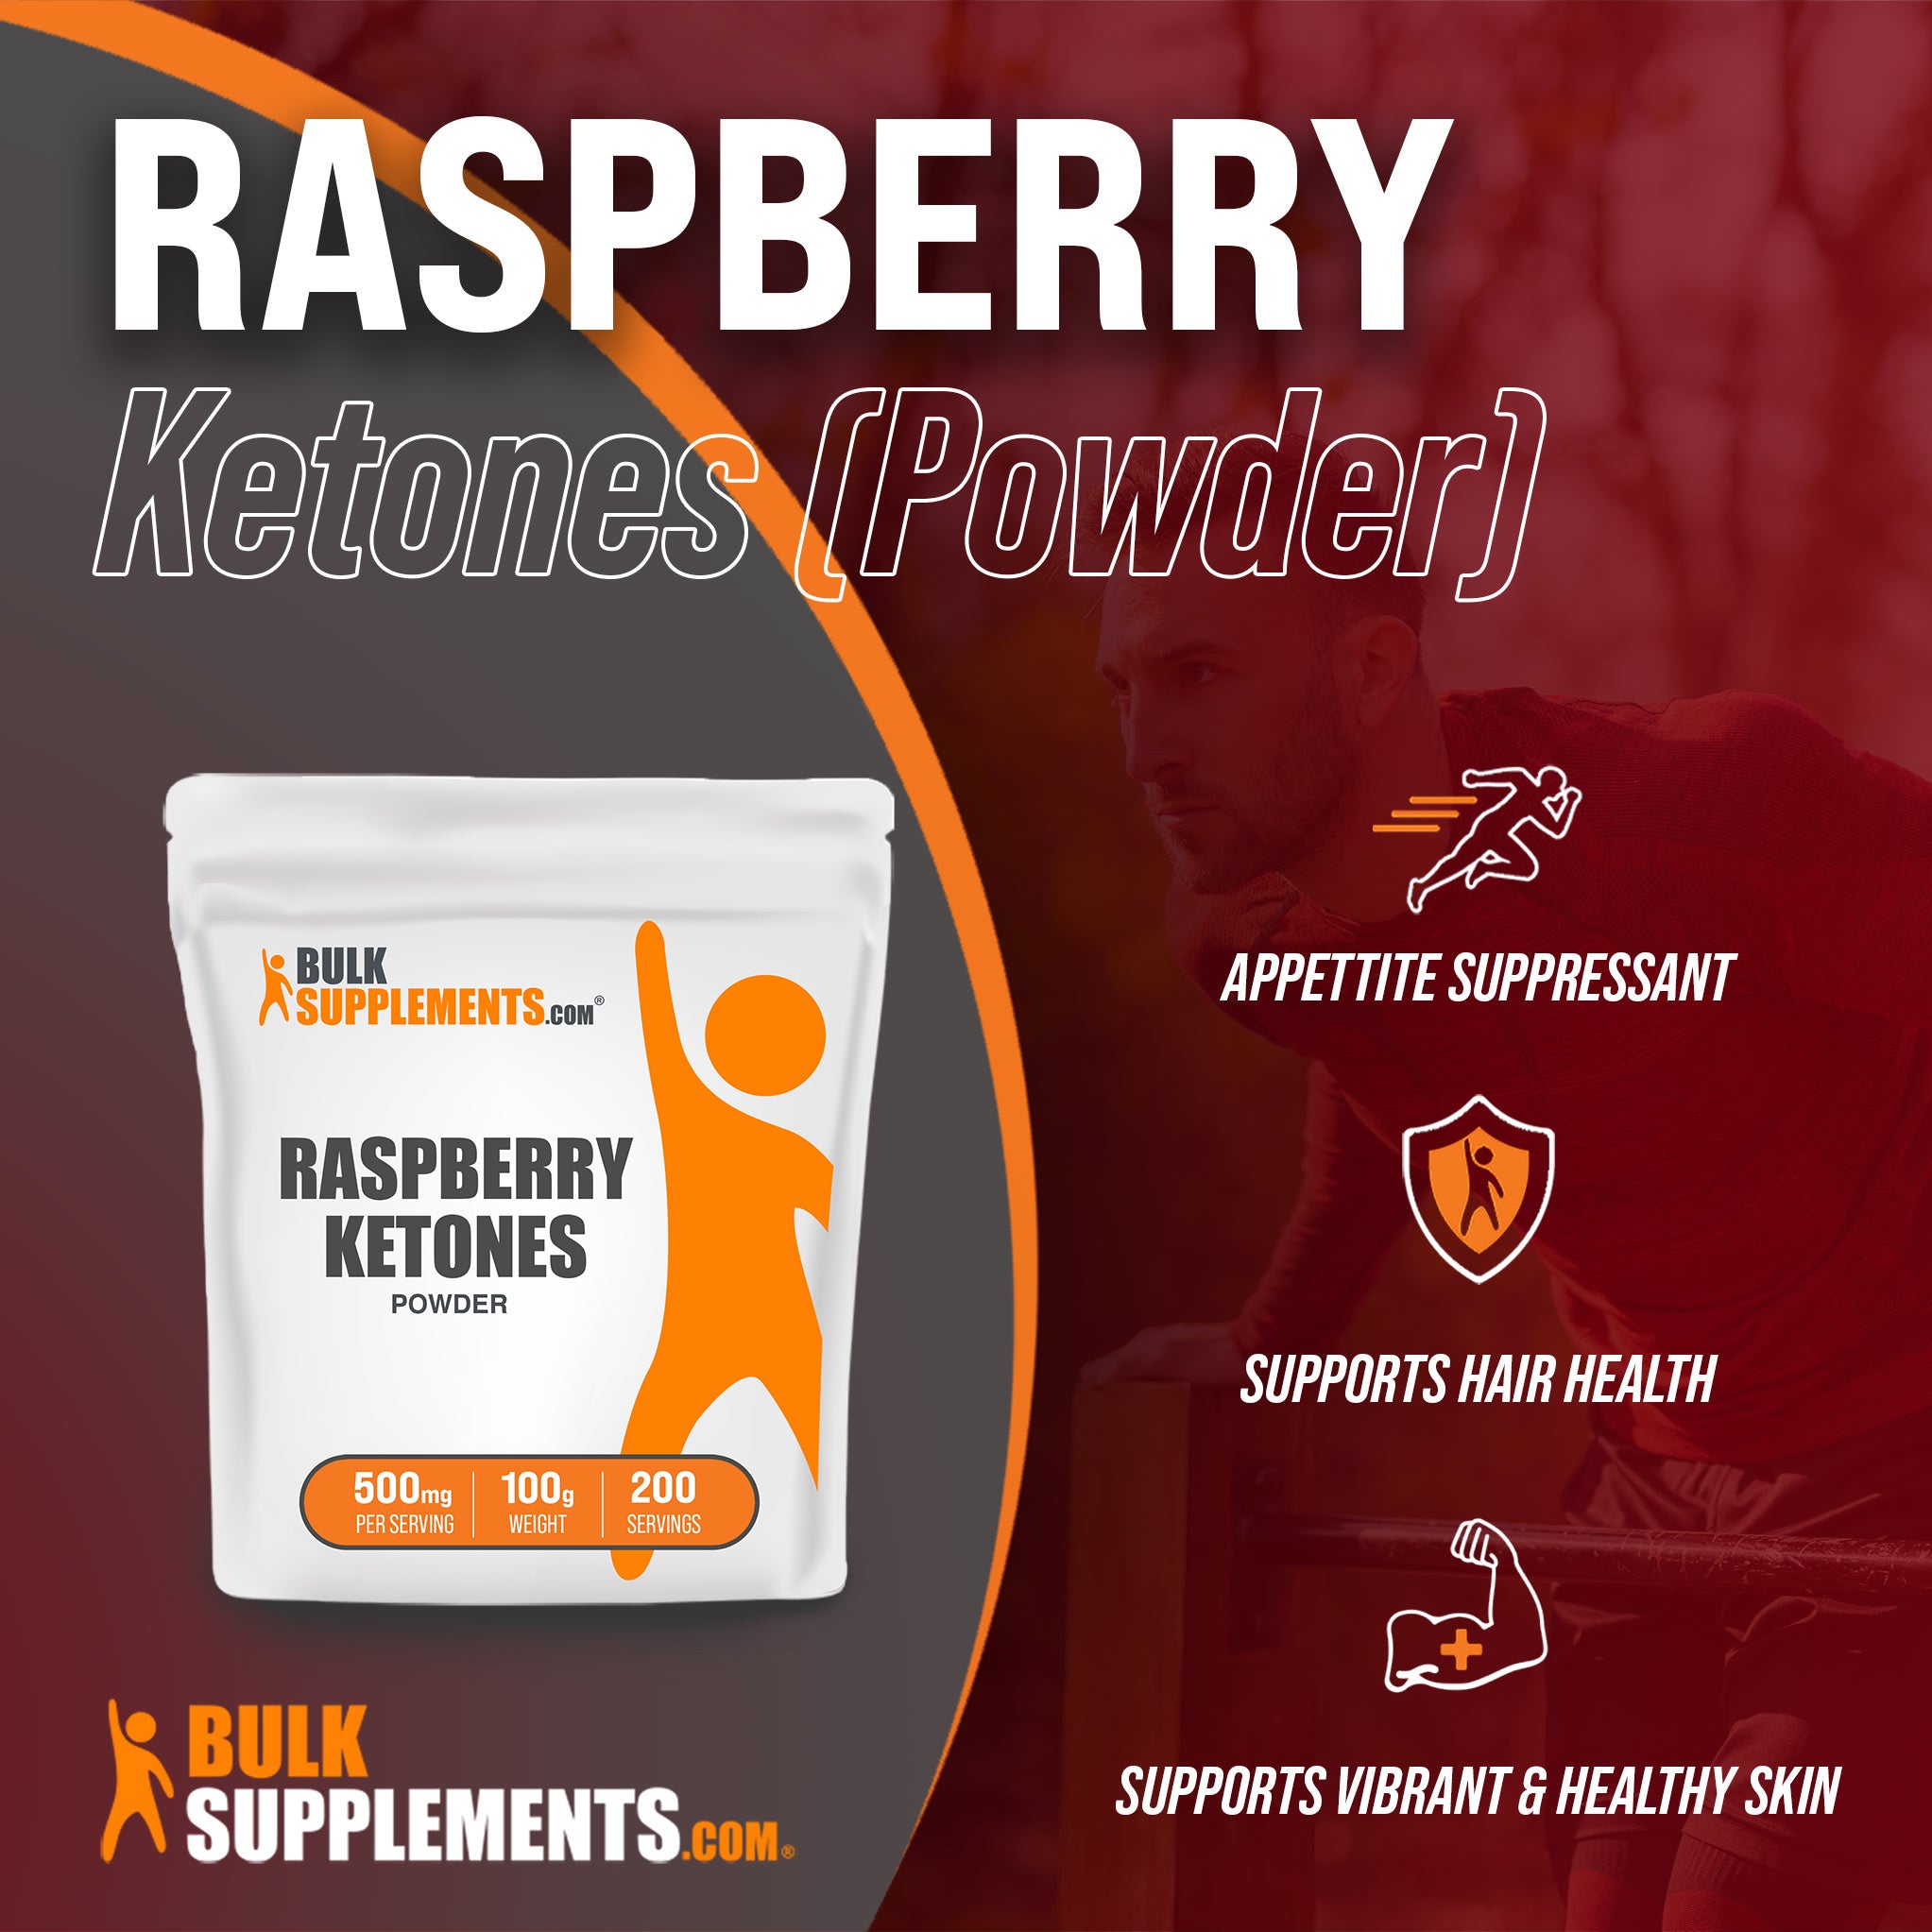 Benefits of Raspberry Ketones: appetite suppressant, supports hair health, supports vibrant and healthy skin